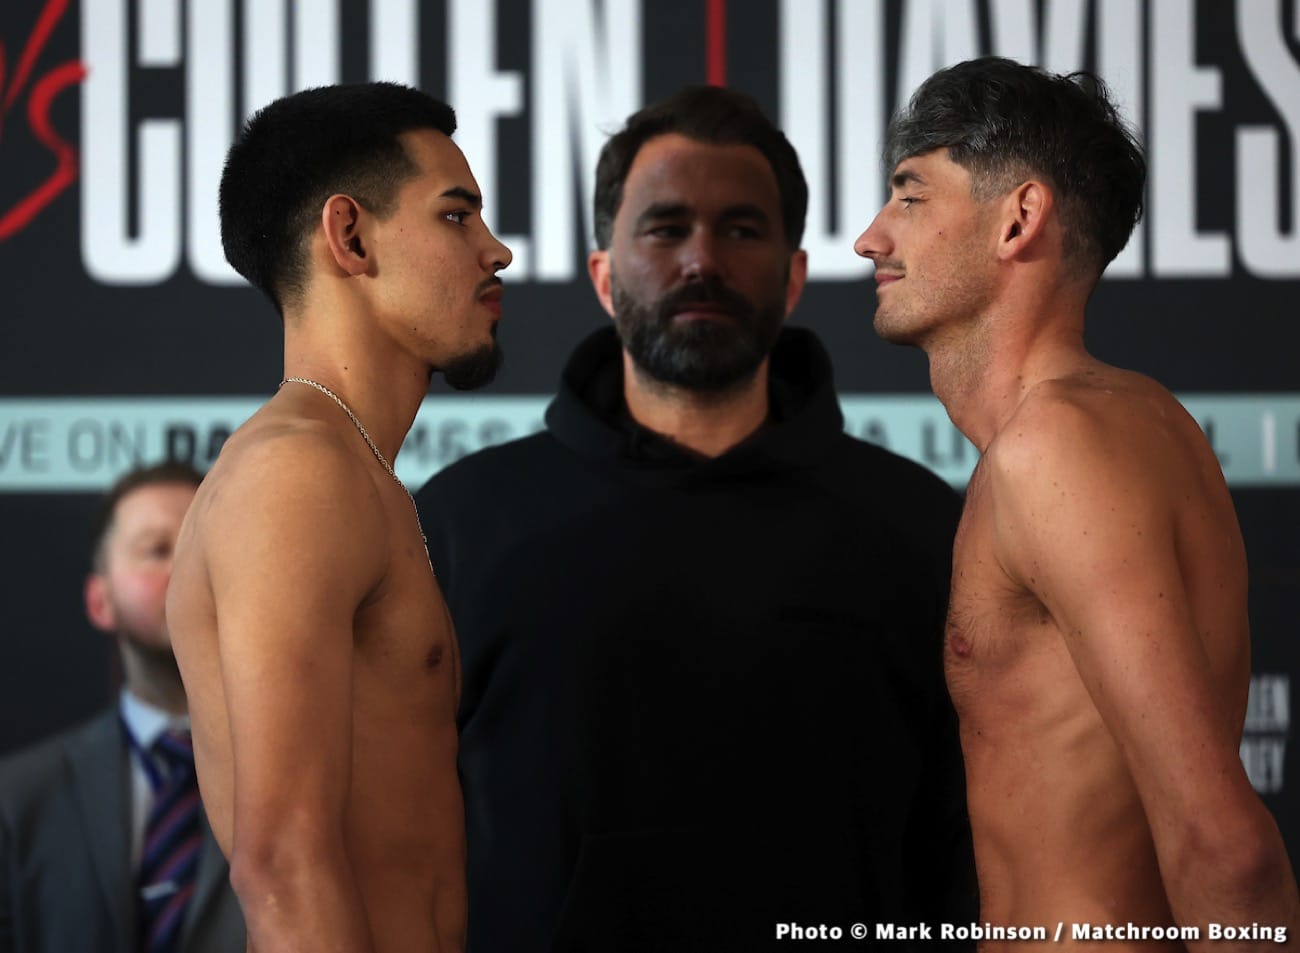 Image: Diego Pacheco 166.10 vs. Jack Cullen 167.8 - weigh-in results